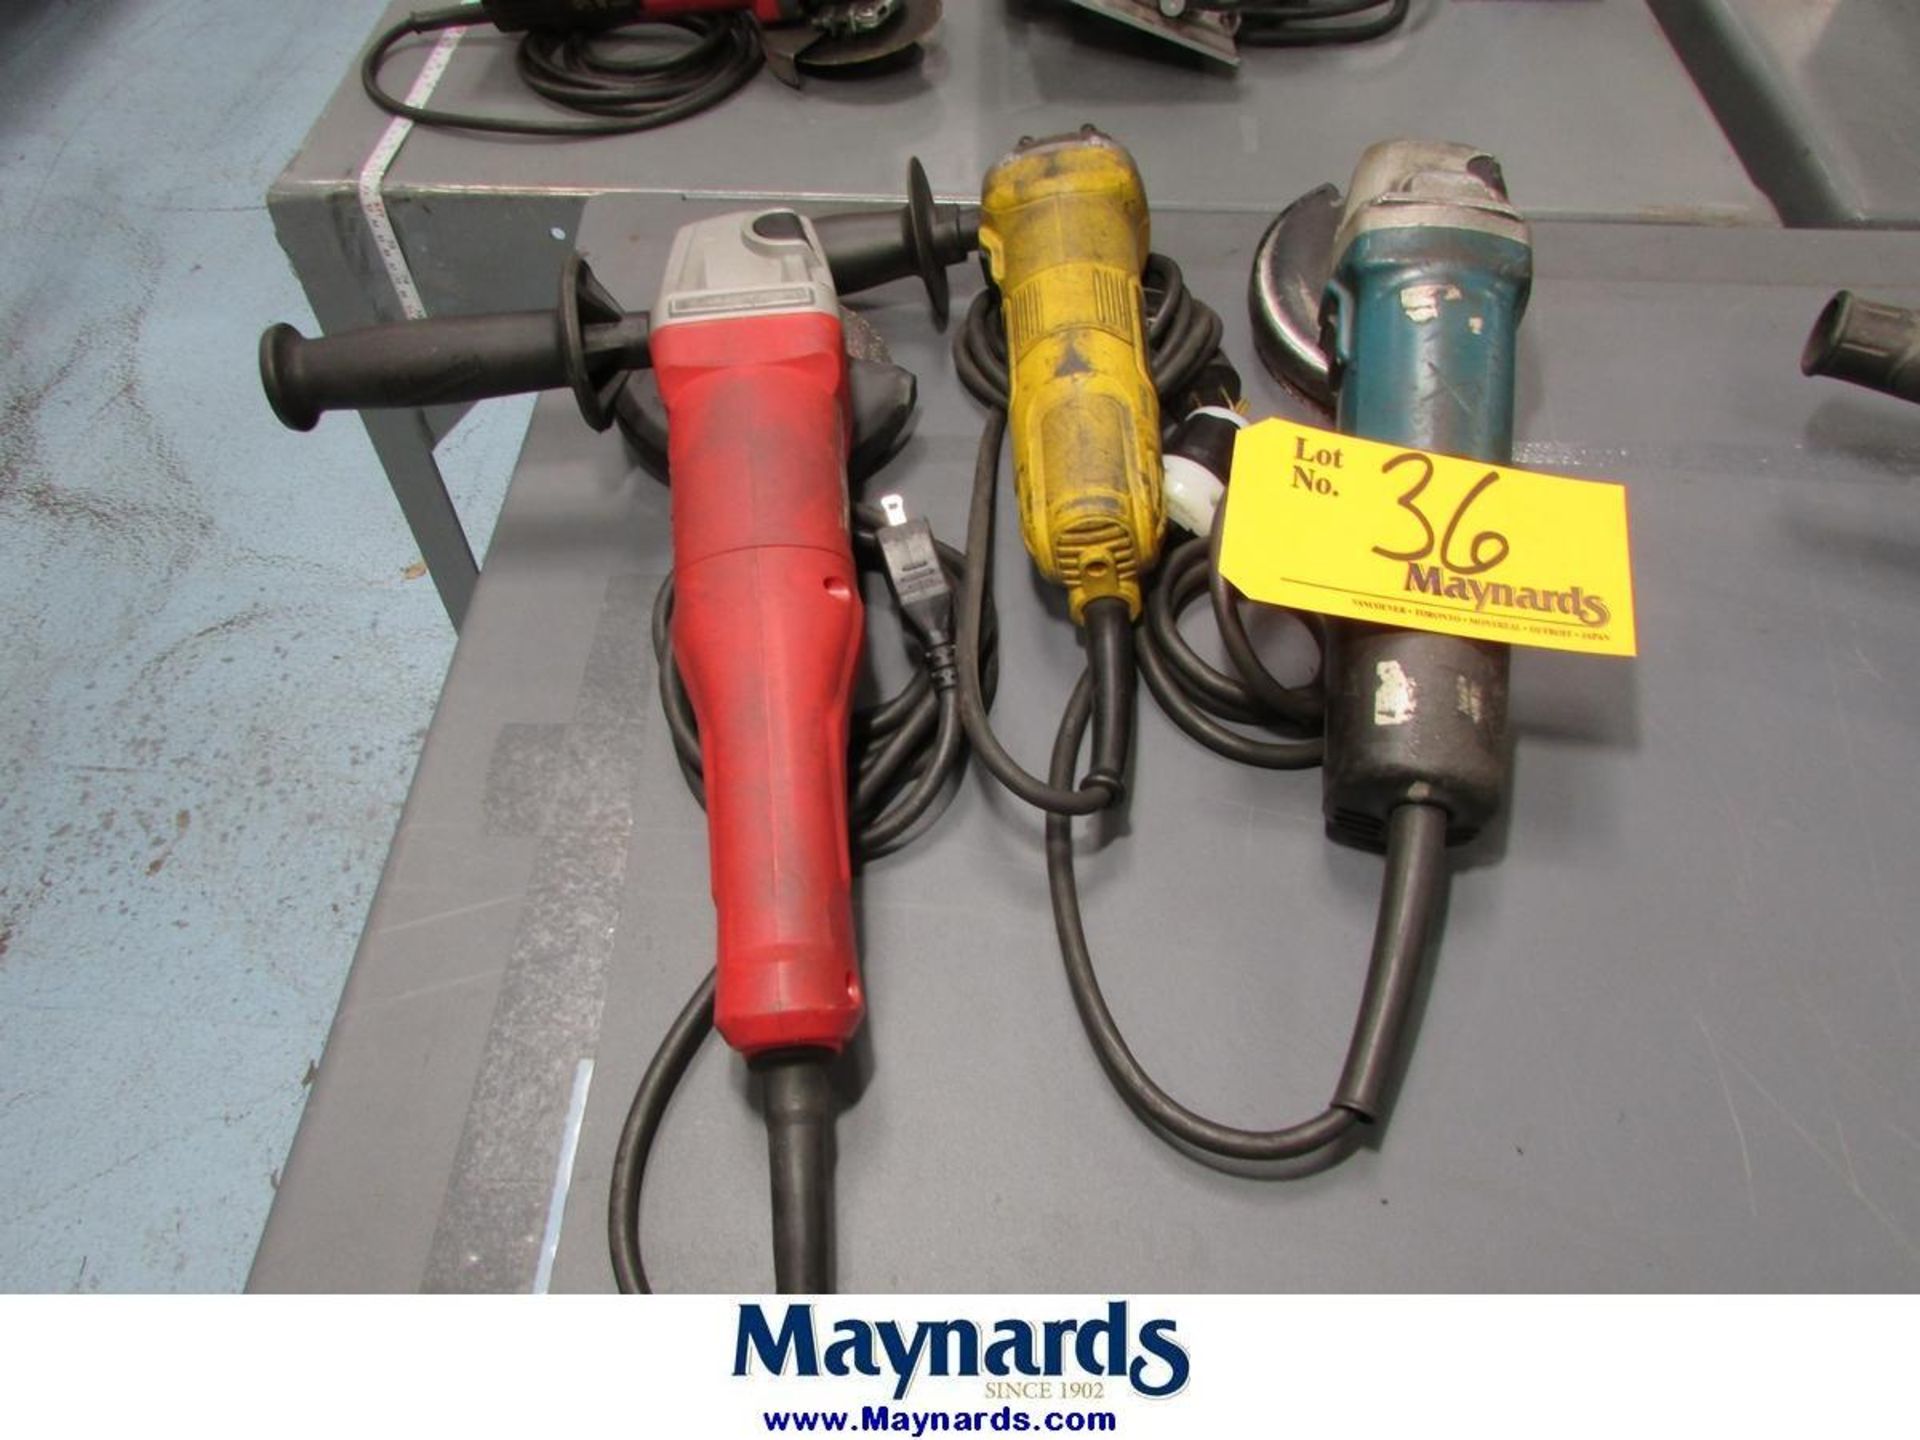 (3) Assorted 4-1/2" Electric Angle Grinders